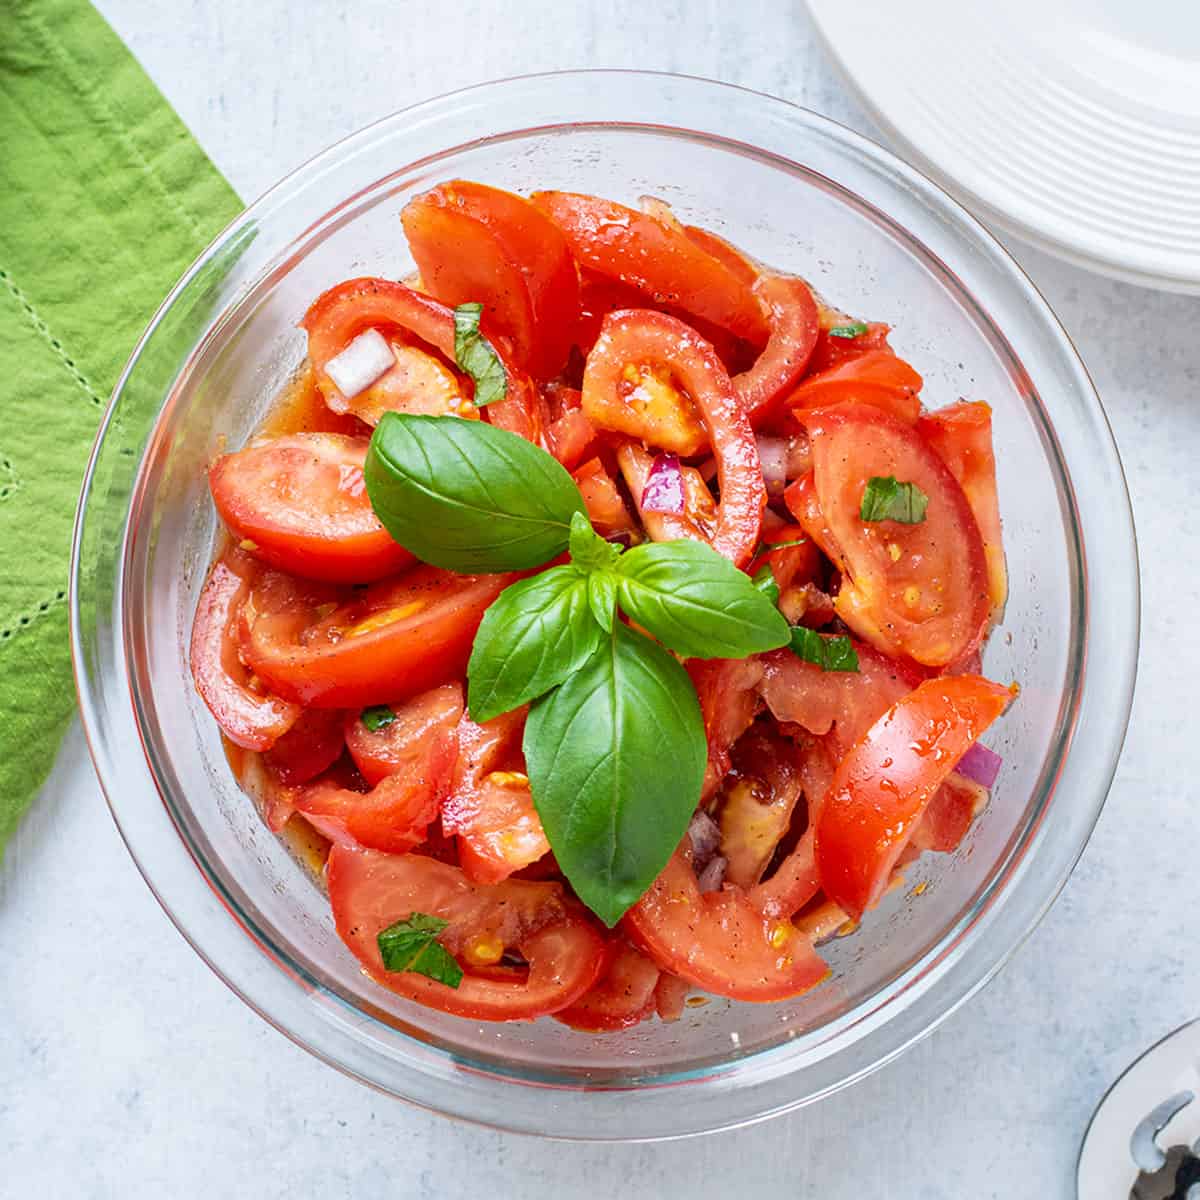 Prepared tomato salad in a glass bowl with basil on top.